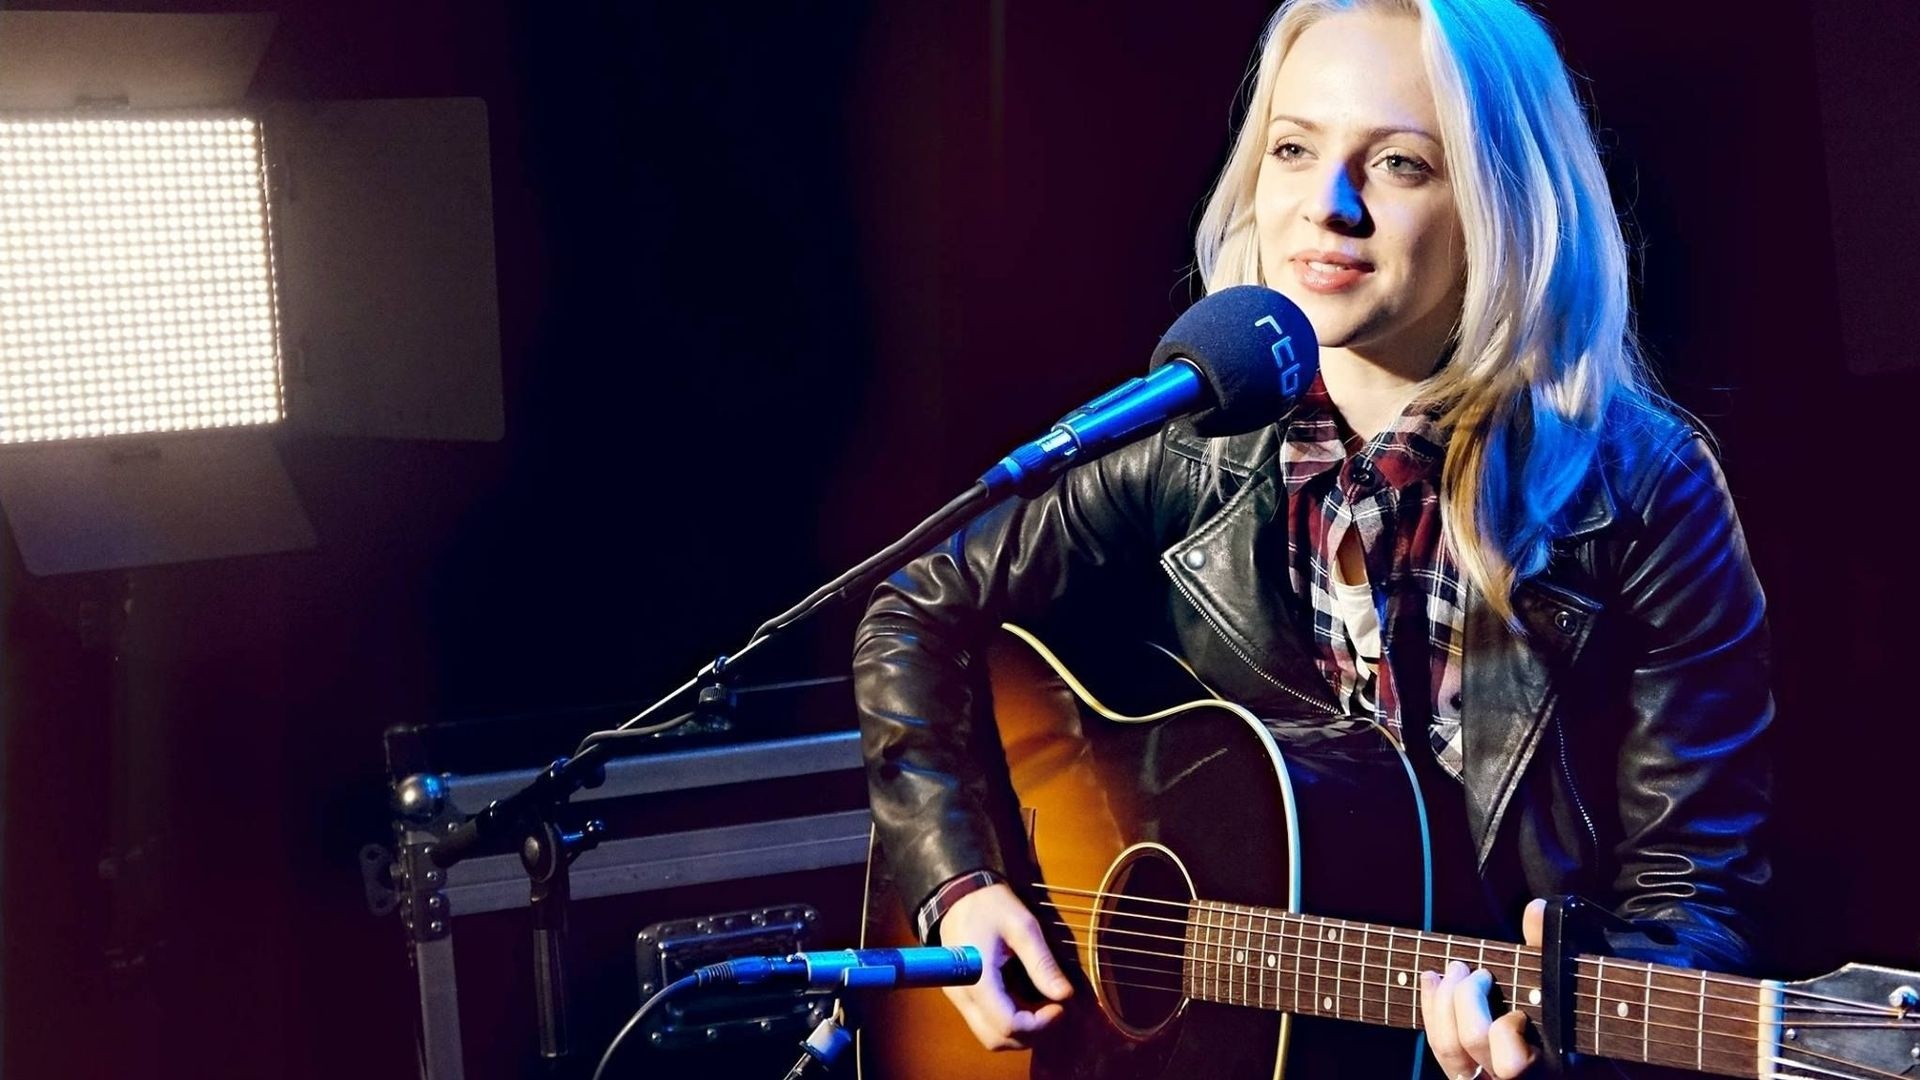 Madilyn Bailey, Rendition of a hit, Emotional journey, Captivating storytelling, 1920x1080 Full HD Desktop